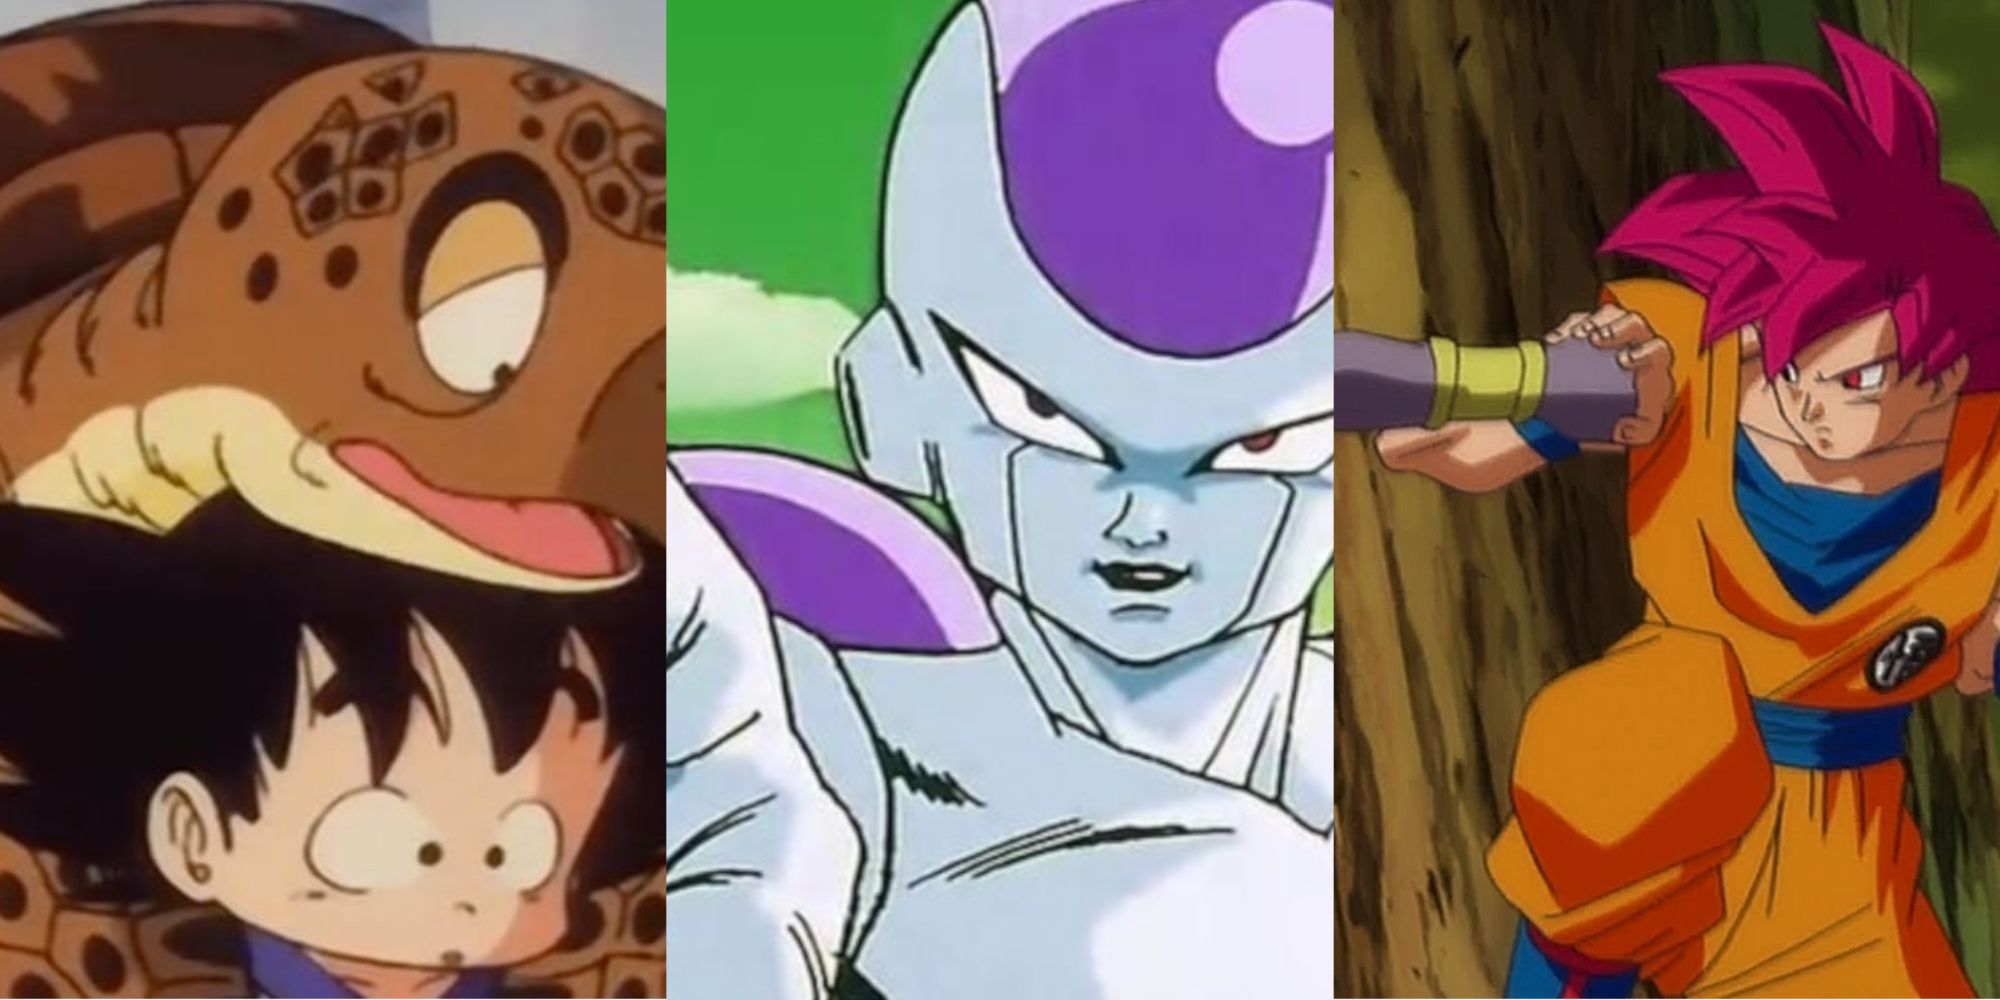 Split image featuring stills from the original Dragon Ball anime, DBZ, and Super